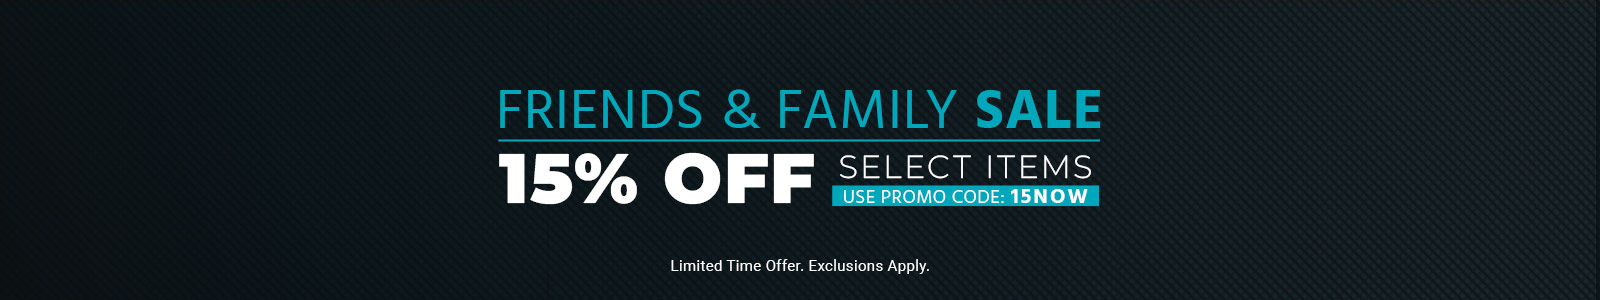 Friends & Family Sale

15% off Select Items
Use promo code: 15NOW
Limited Time Offer. Exclusions Apply. 
Shop Now